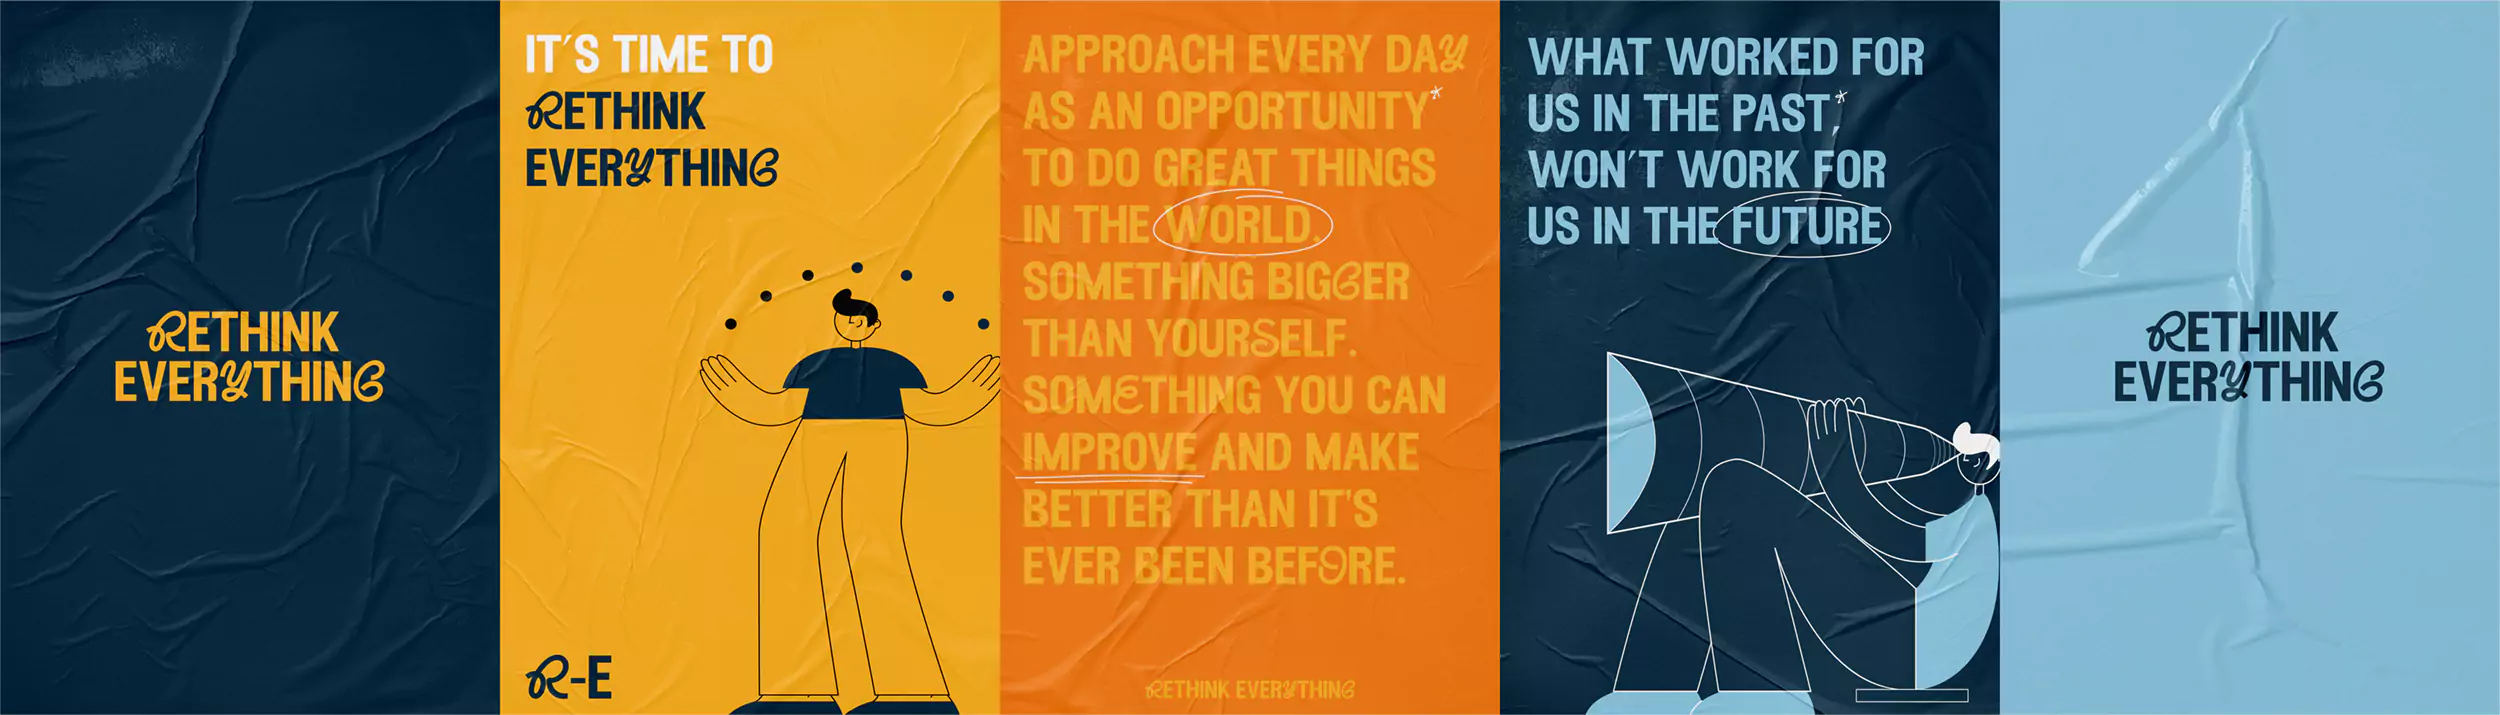 Visual Identity for Rethink Everything - Poster Designs